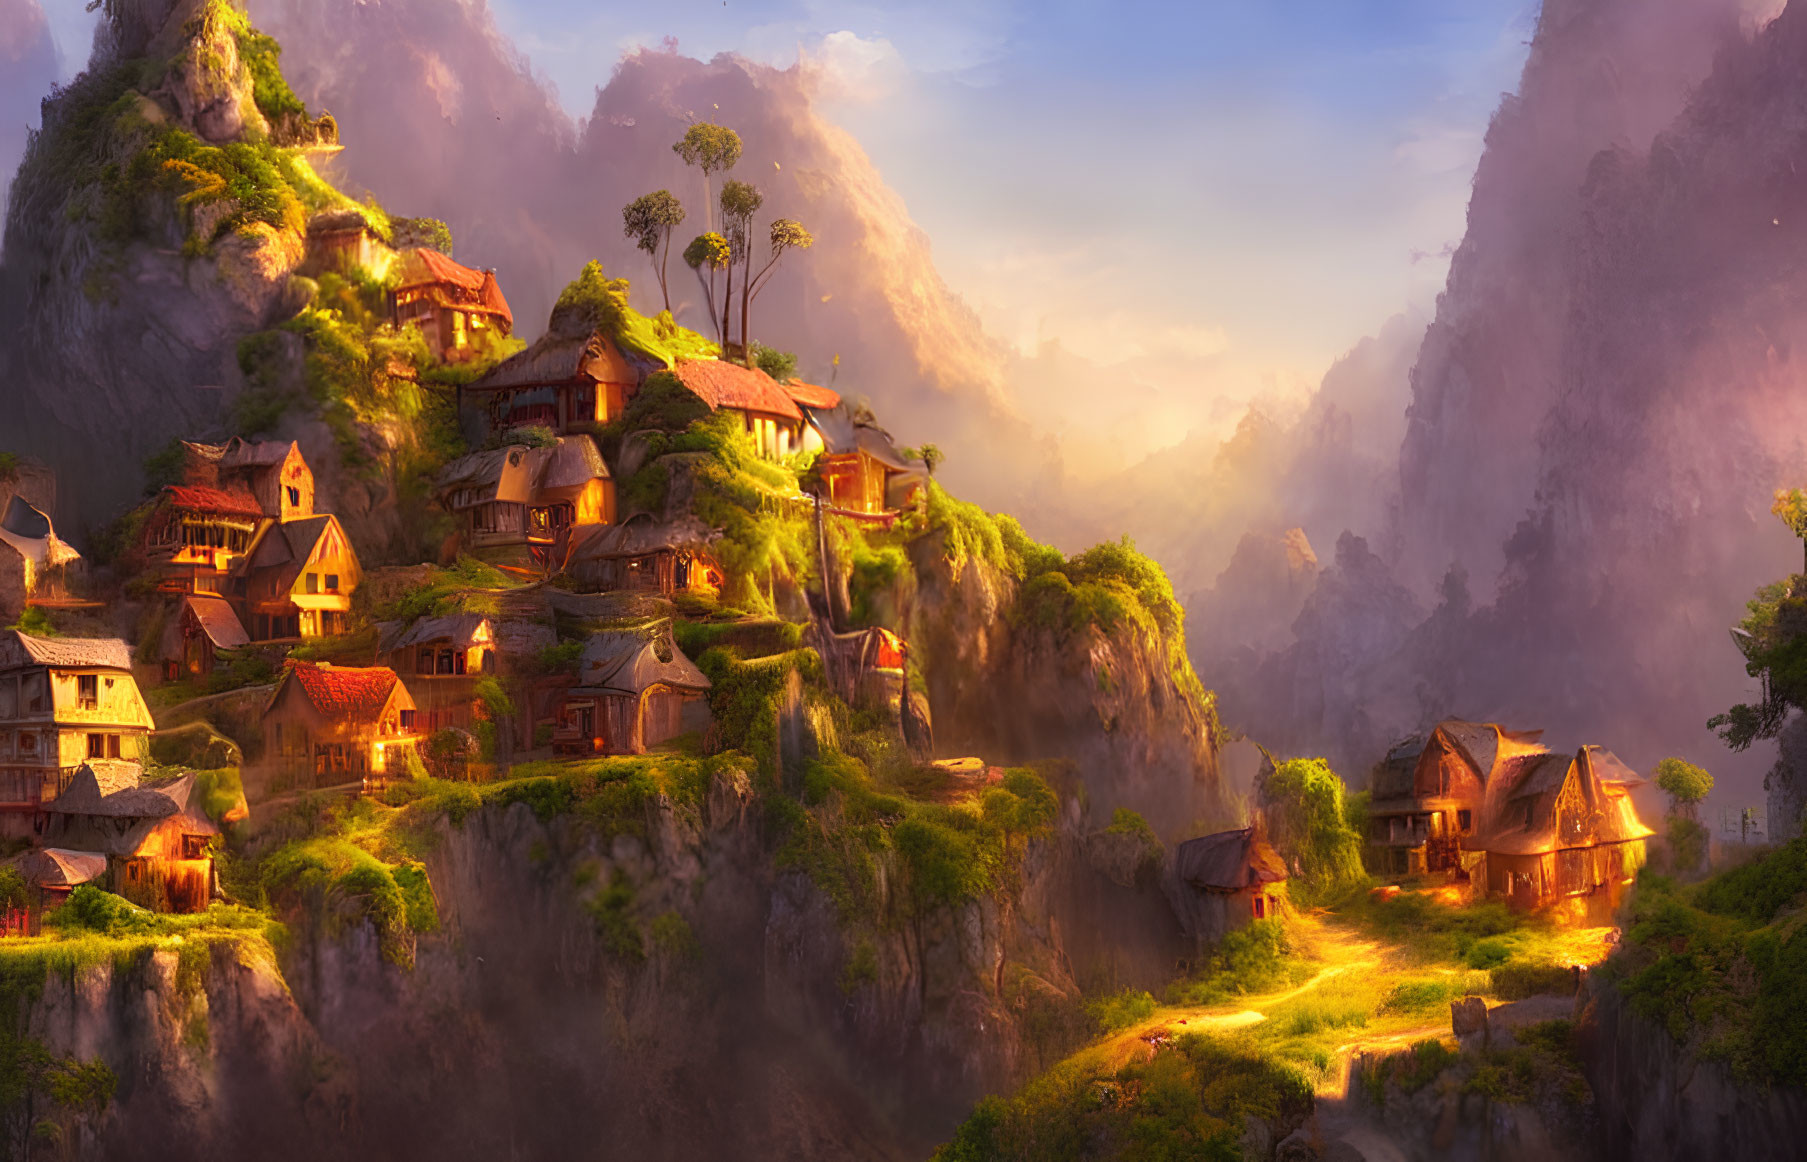 Scenic village on sunlit mountain slopes with cozy houses among trees